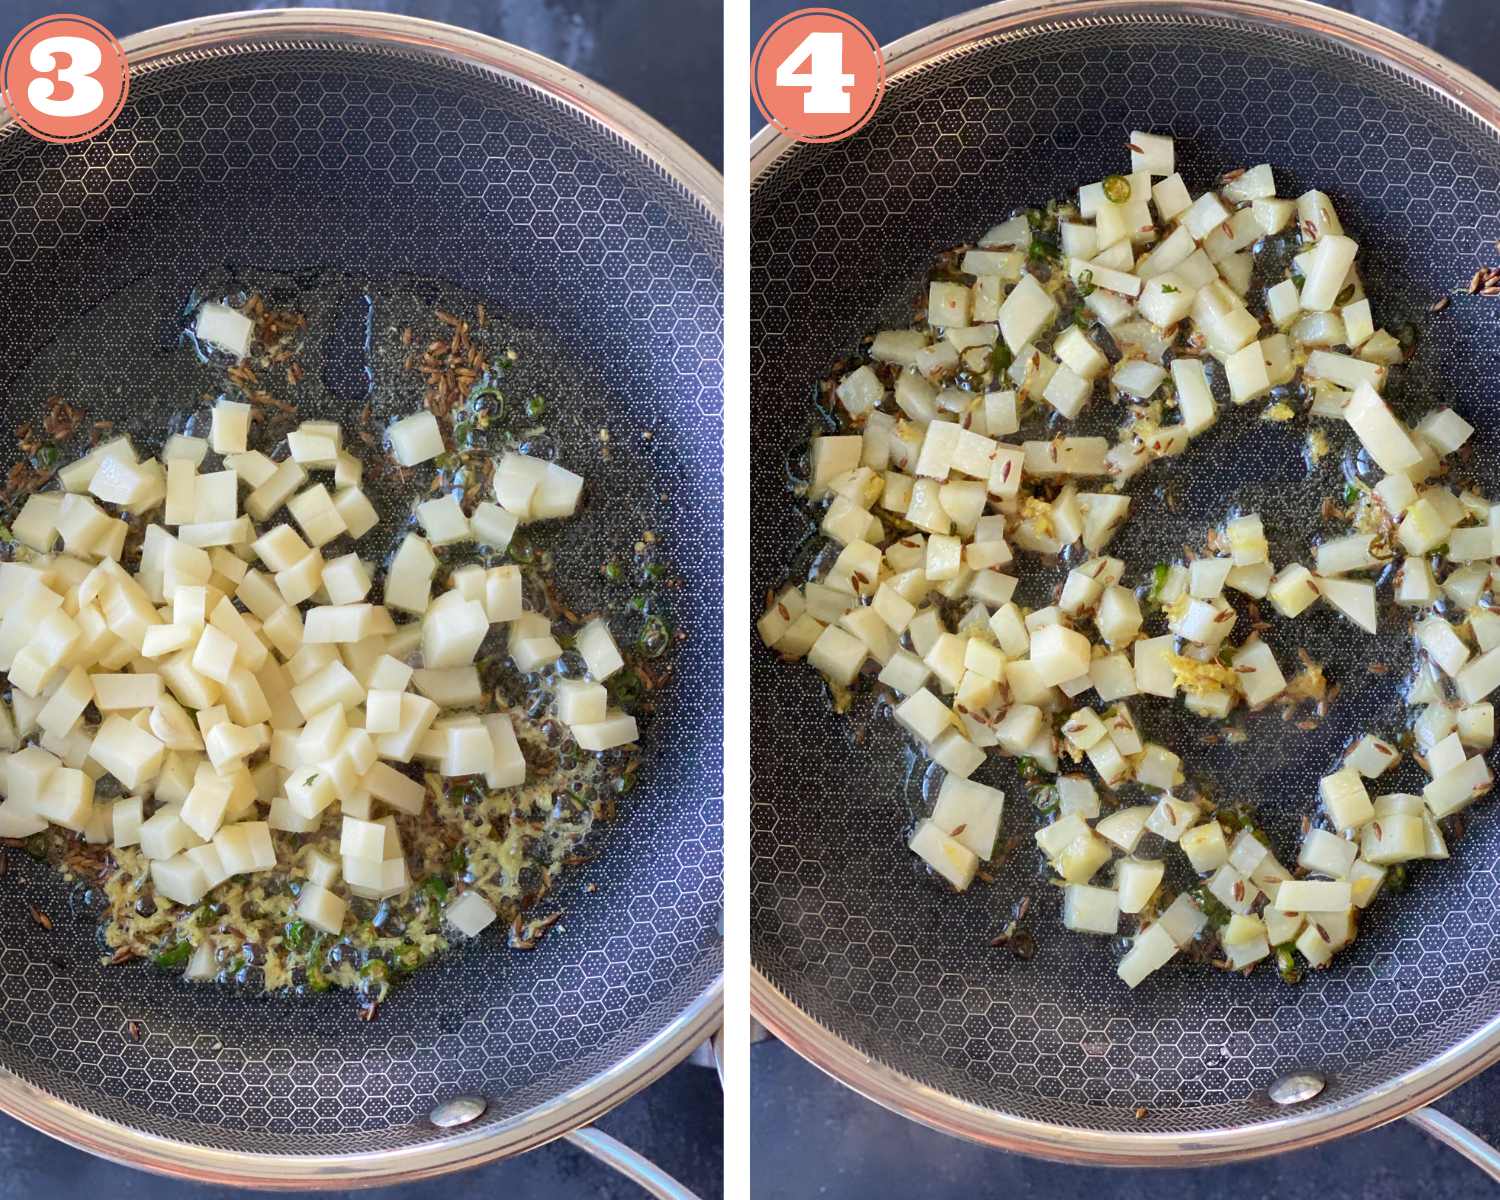 Add diced potatoes to the pan and cook till soft.